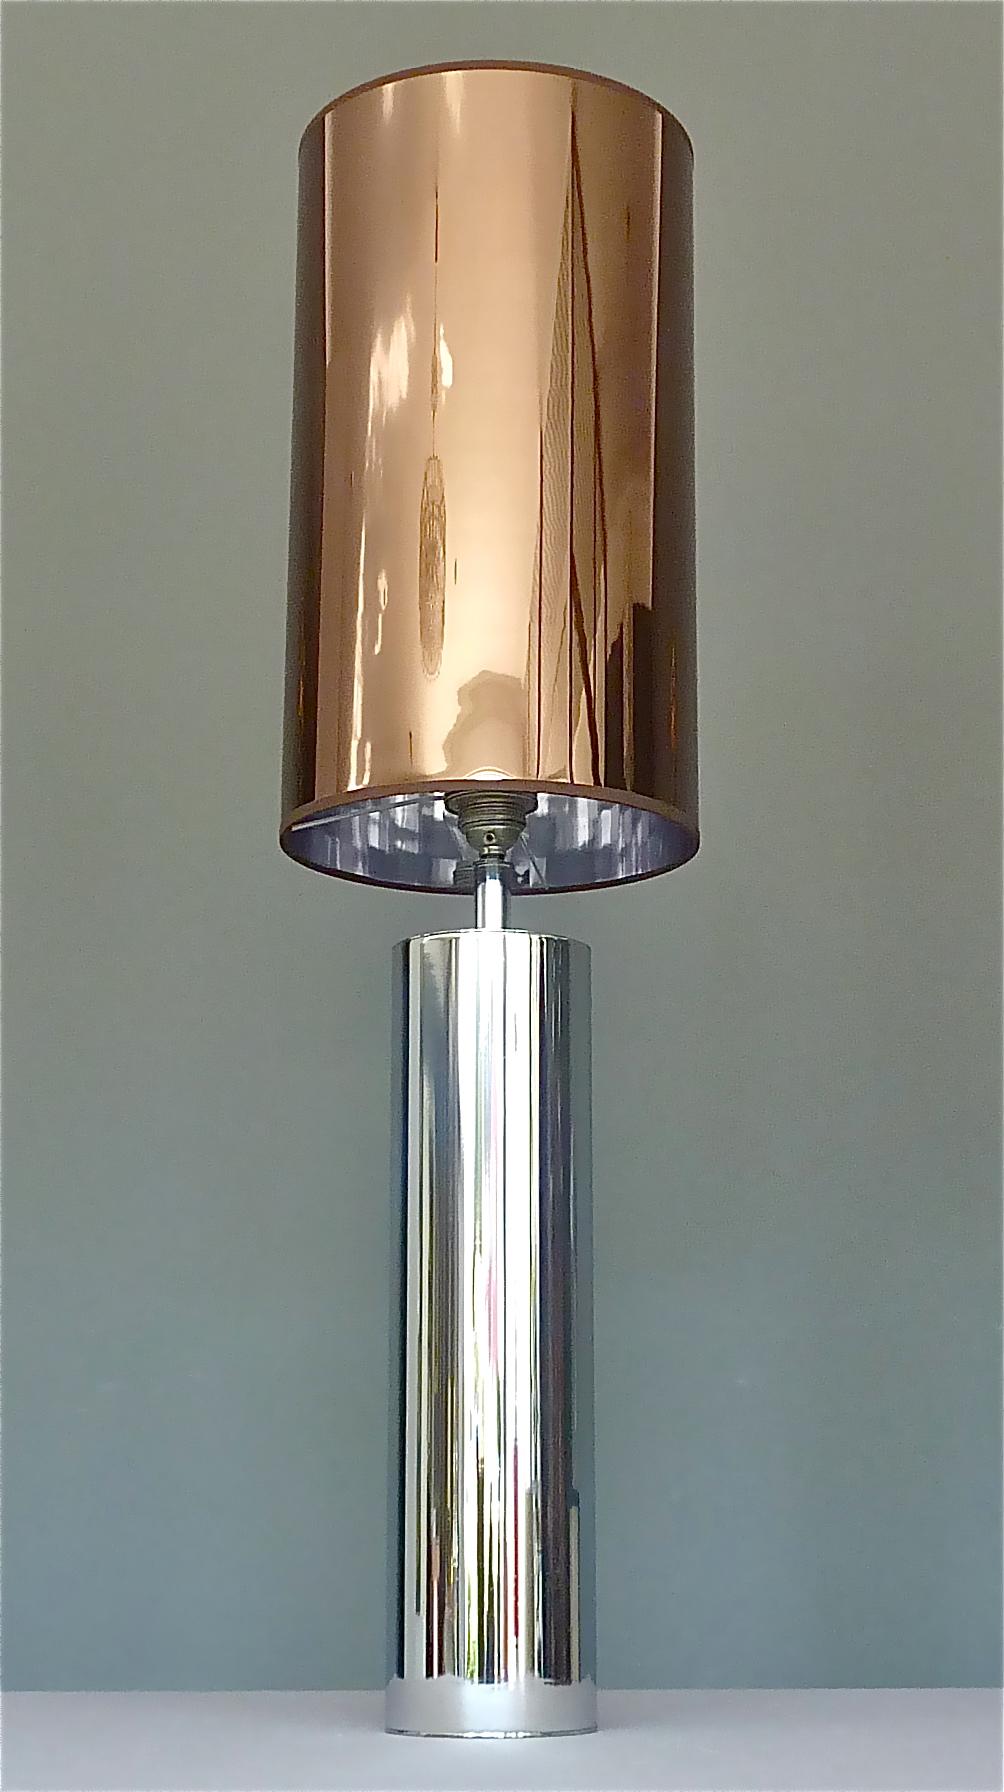 Space Age Monumental Chrome Steel Table Lamp Willy Rizzo Cardin Style Bronze Mirror 1970s For Sale